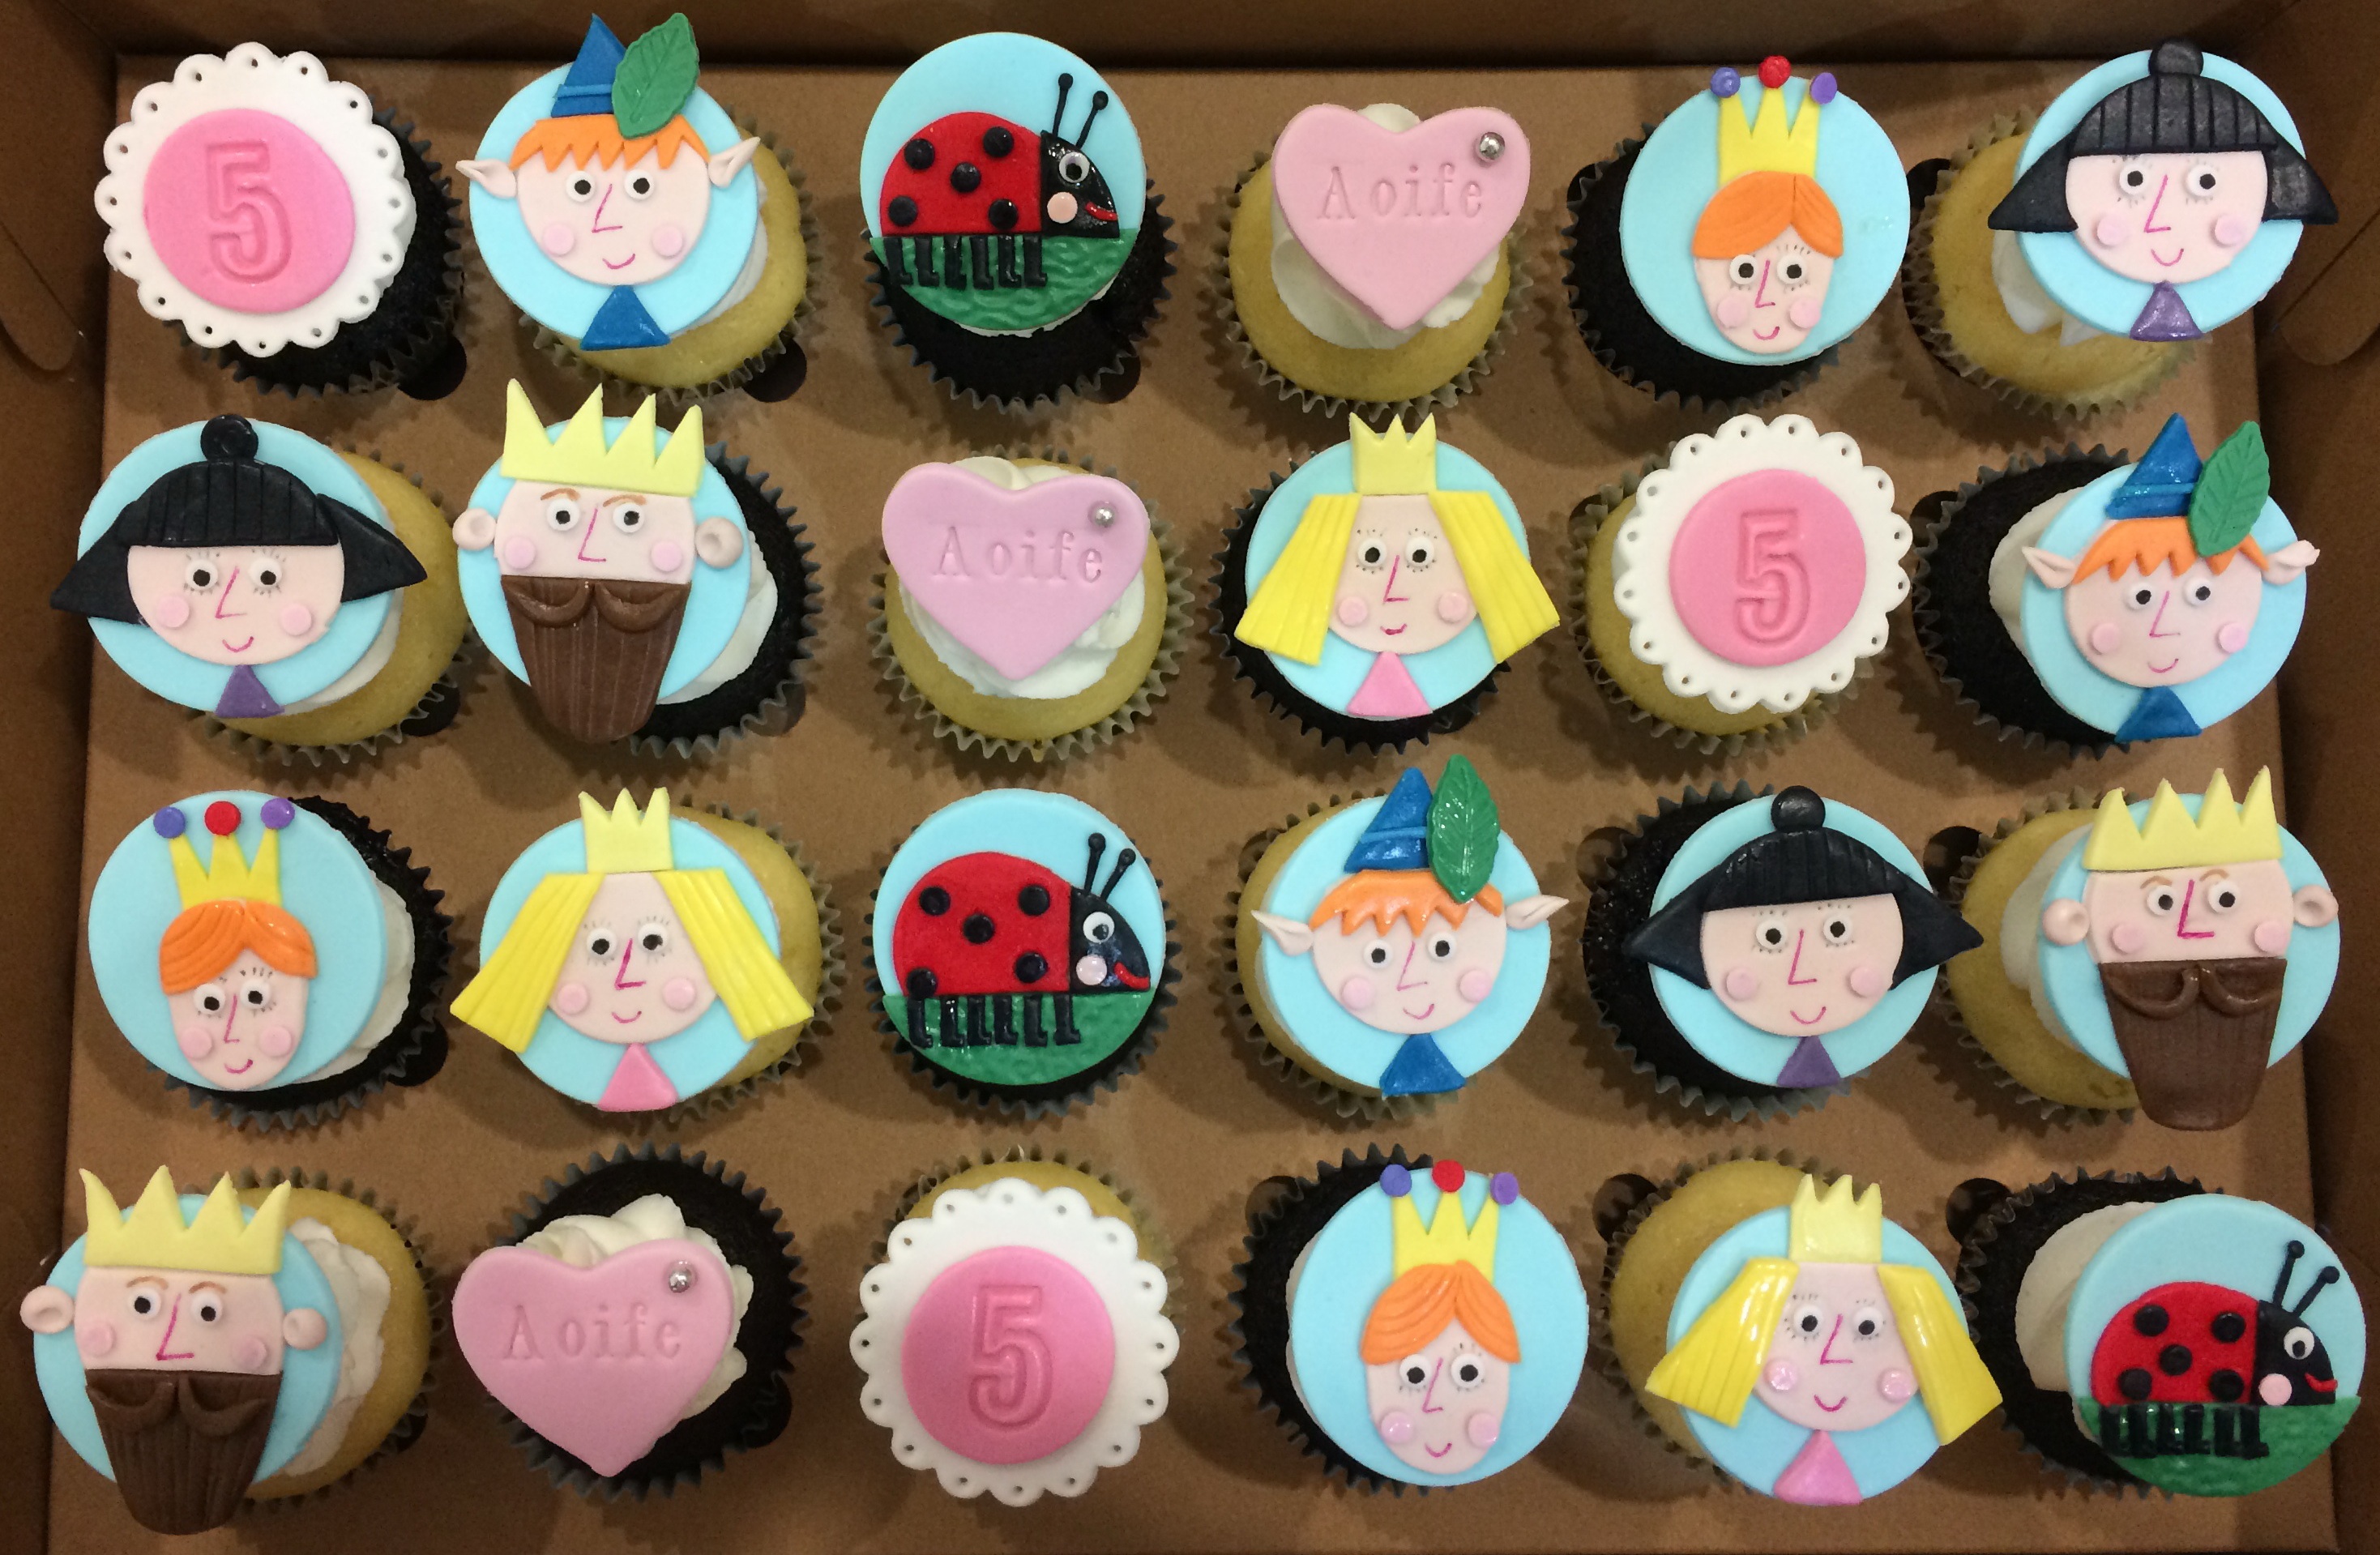 Cupcakes for Kids Sugar and Spice Cupcakes